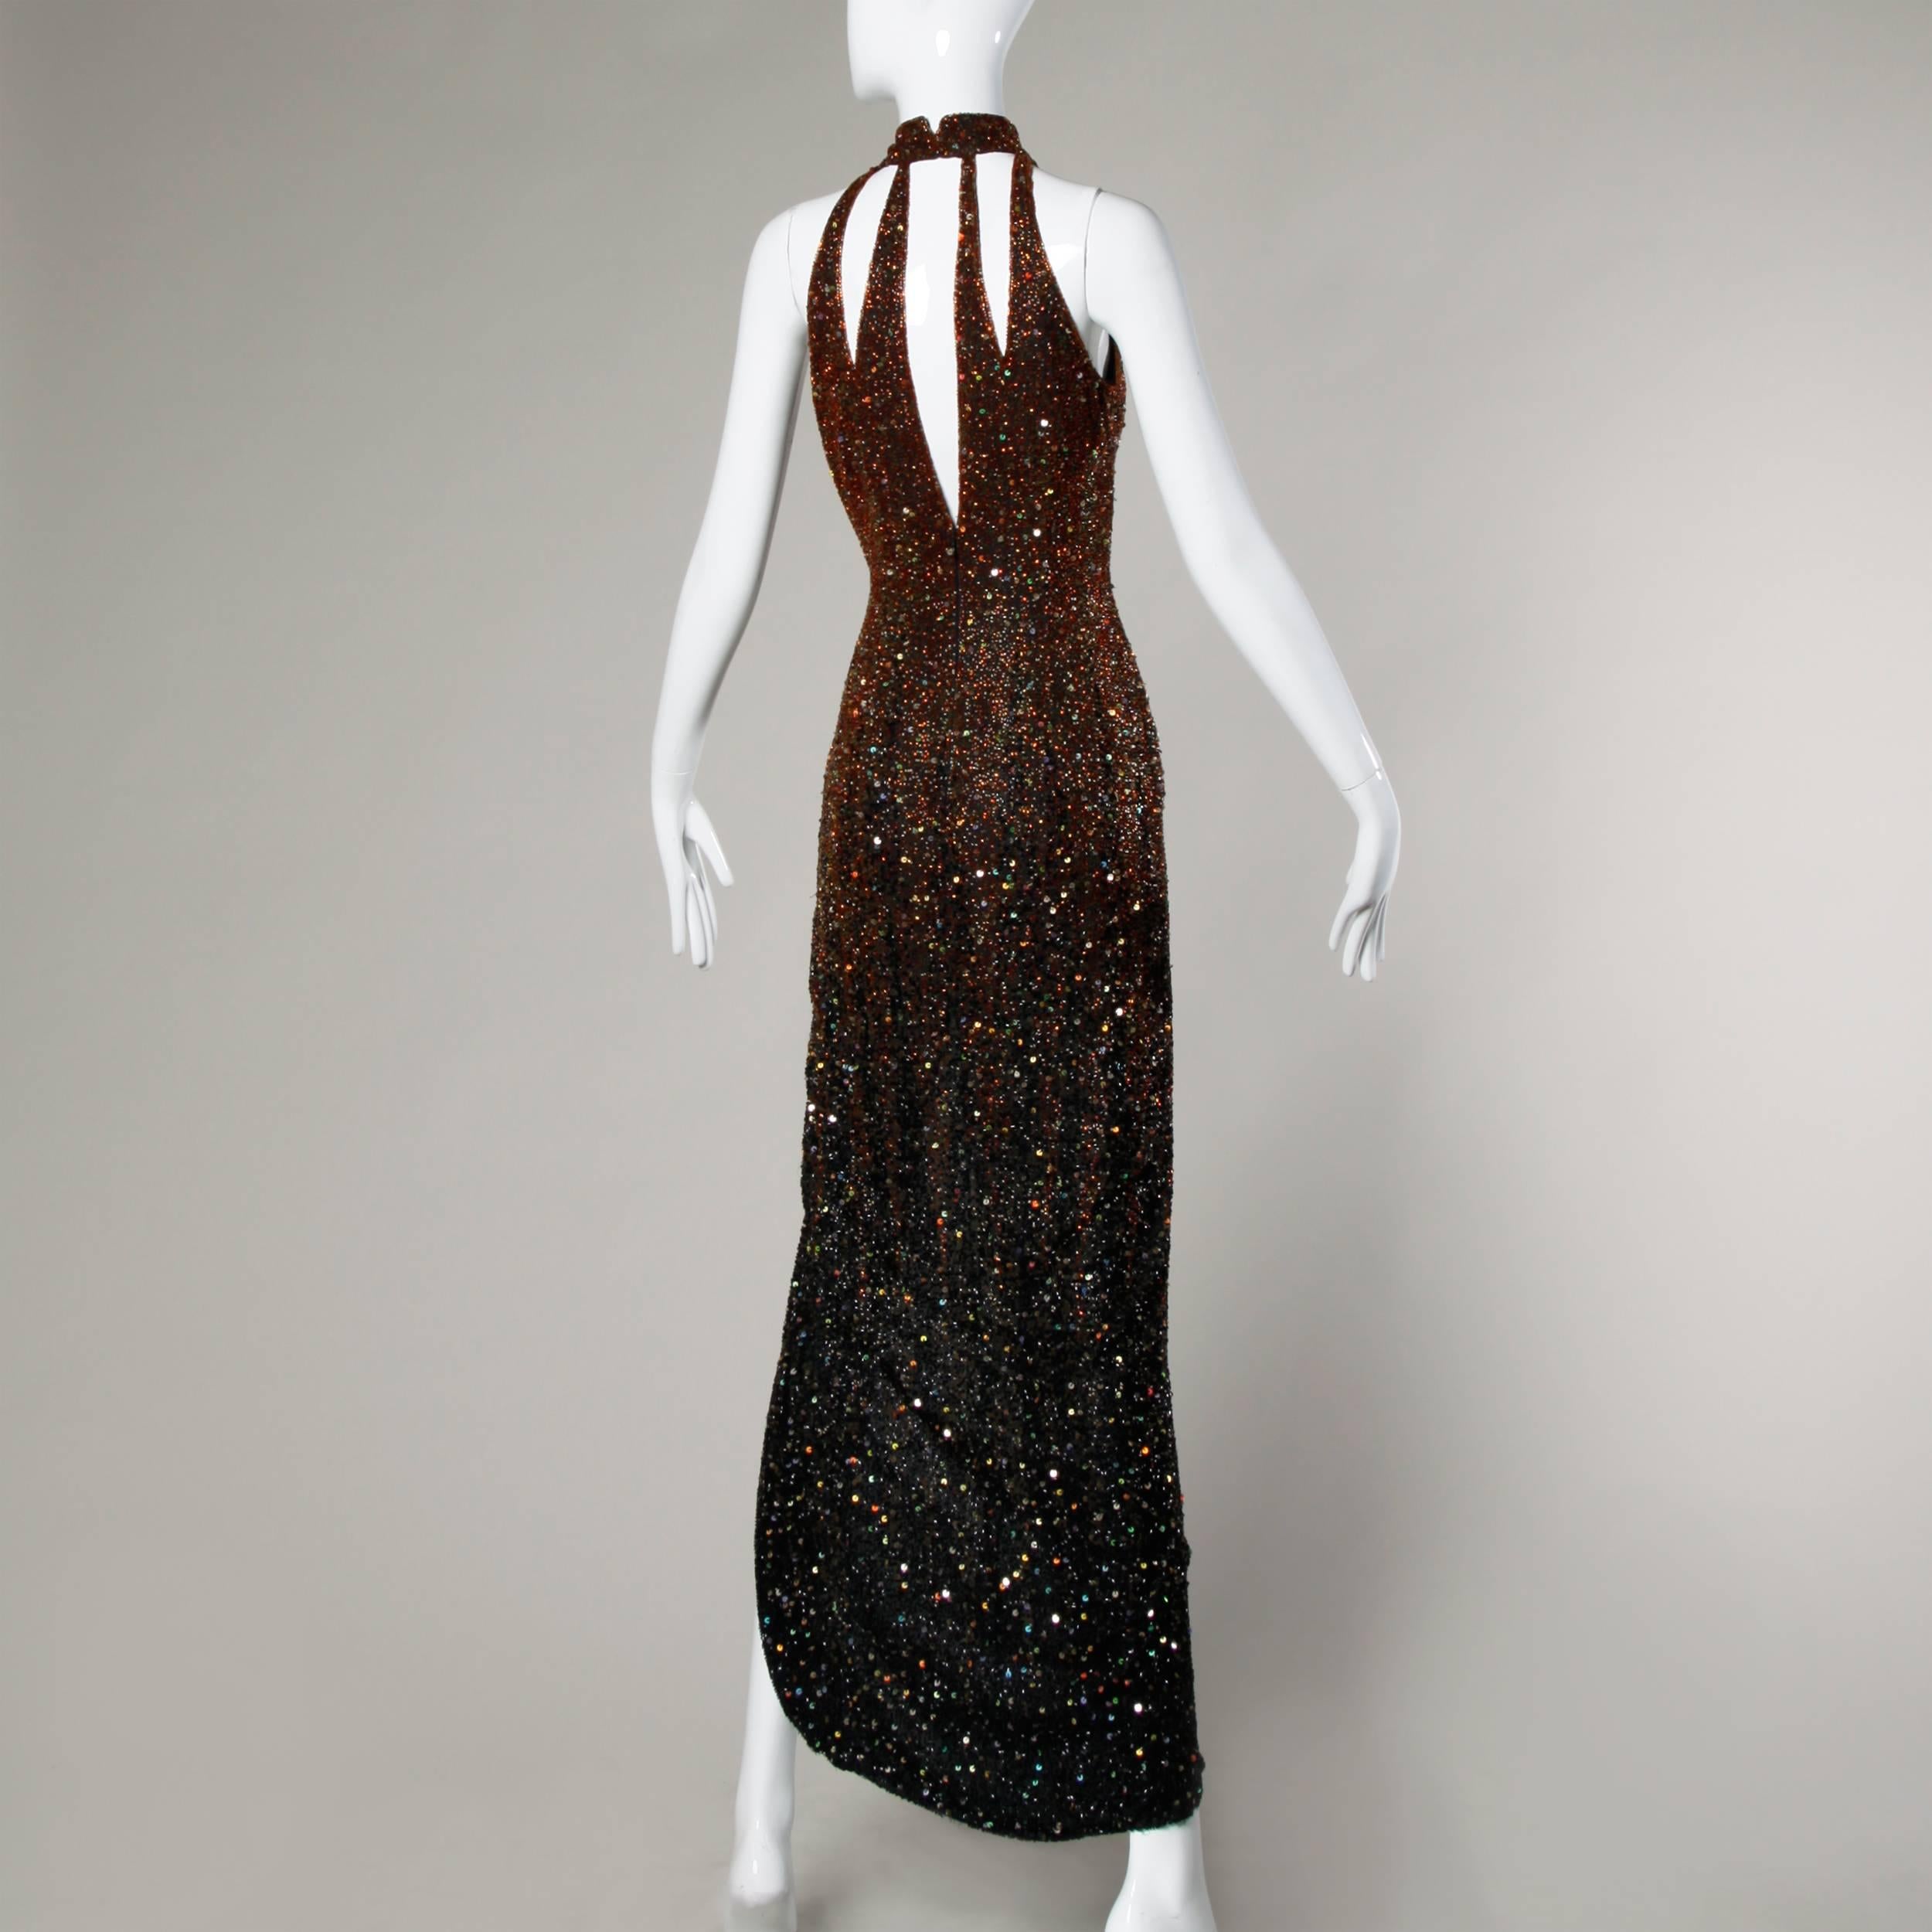 Incredible heavily beaded silk gown in with ombre sequin and beadwork that gets darker towards the bottom of the dress. Cut out detail and side slit.

Details:

Fully Lined
Back Zip and Hook at Neck Closure
Marked Size: US 2
Estimated Size: